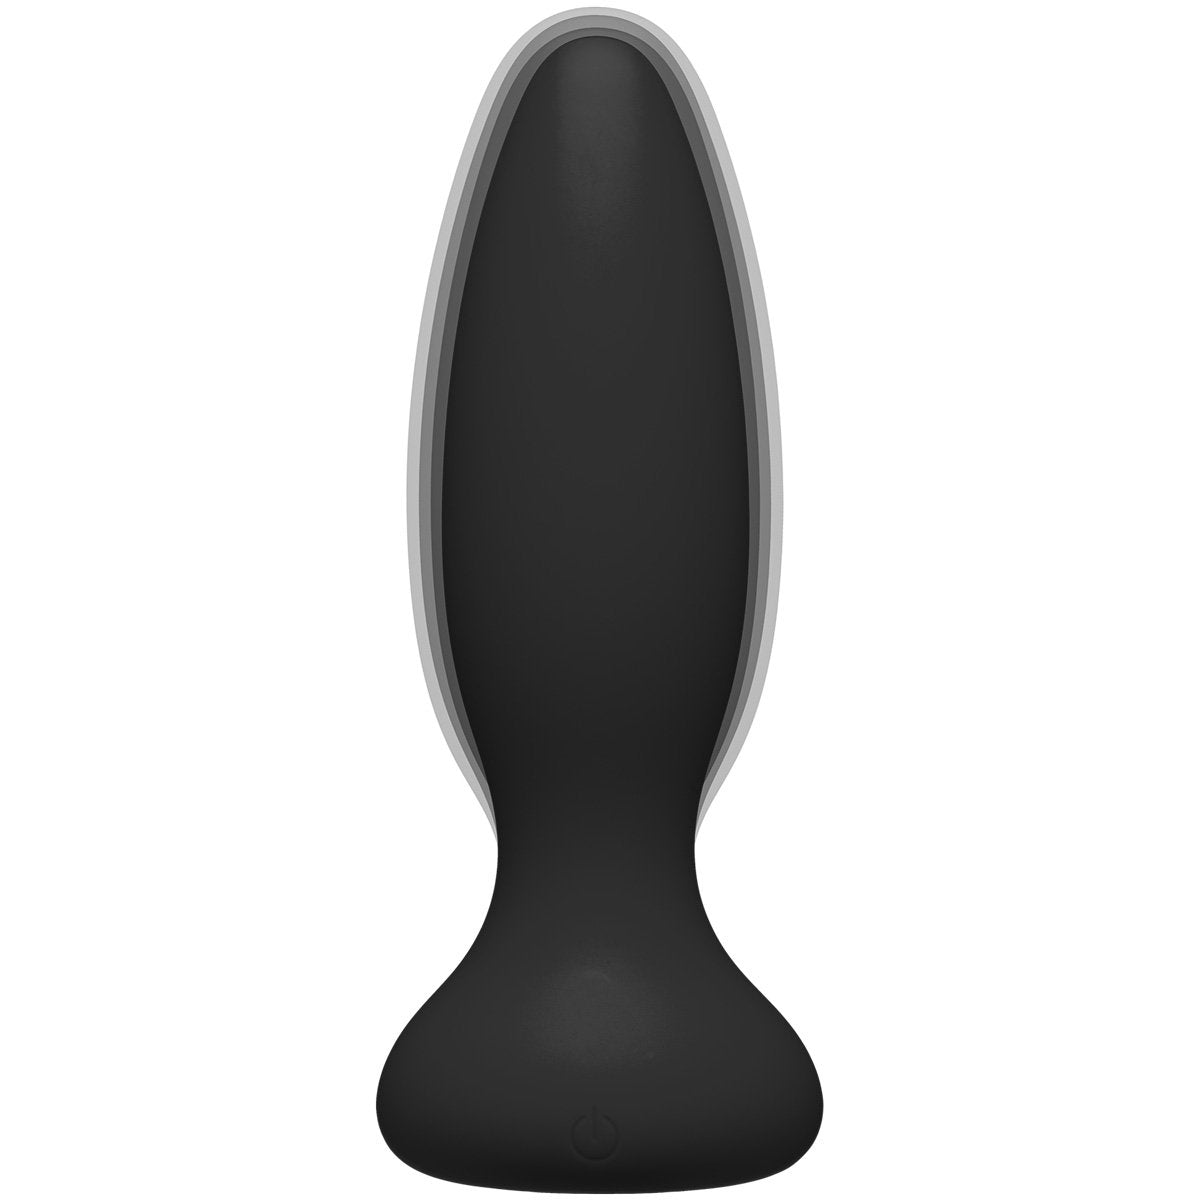 Doc Johnson A Play Beginner VIBE – Silicone Vibrating Butt Plug with Remote – Black